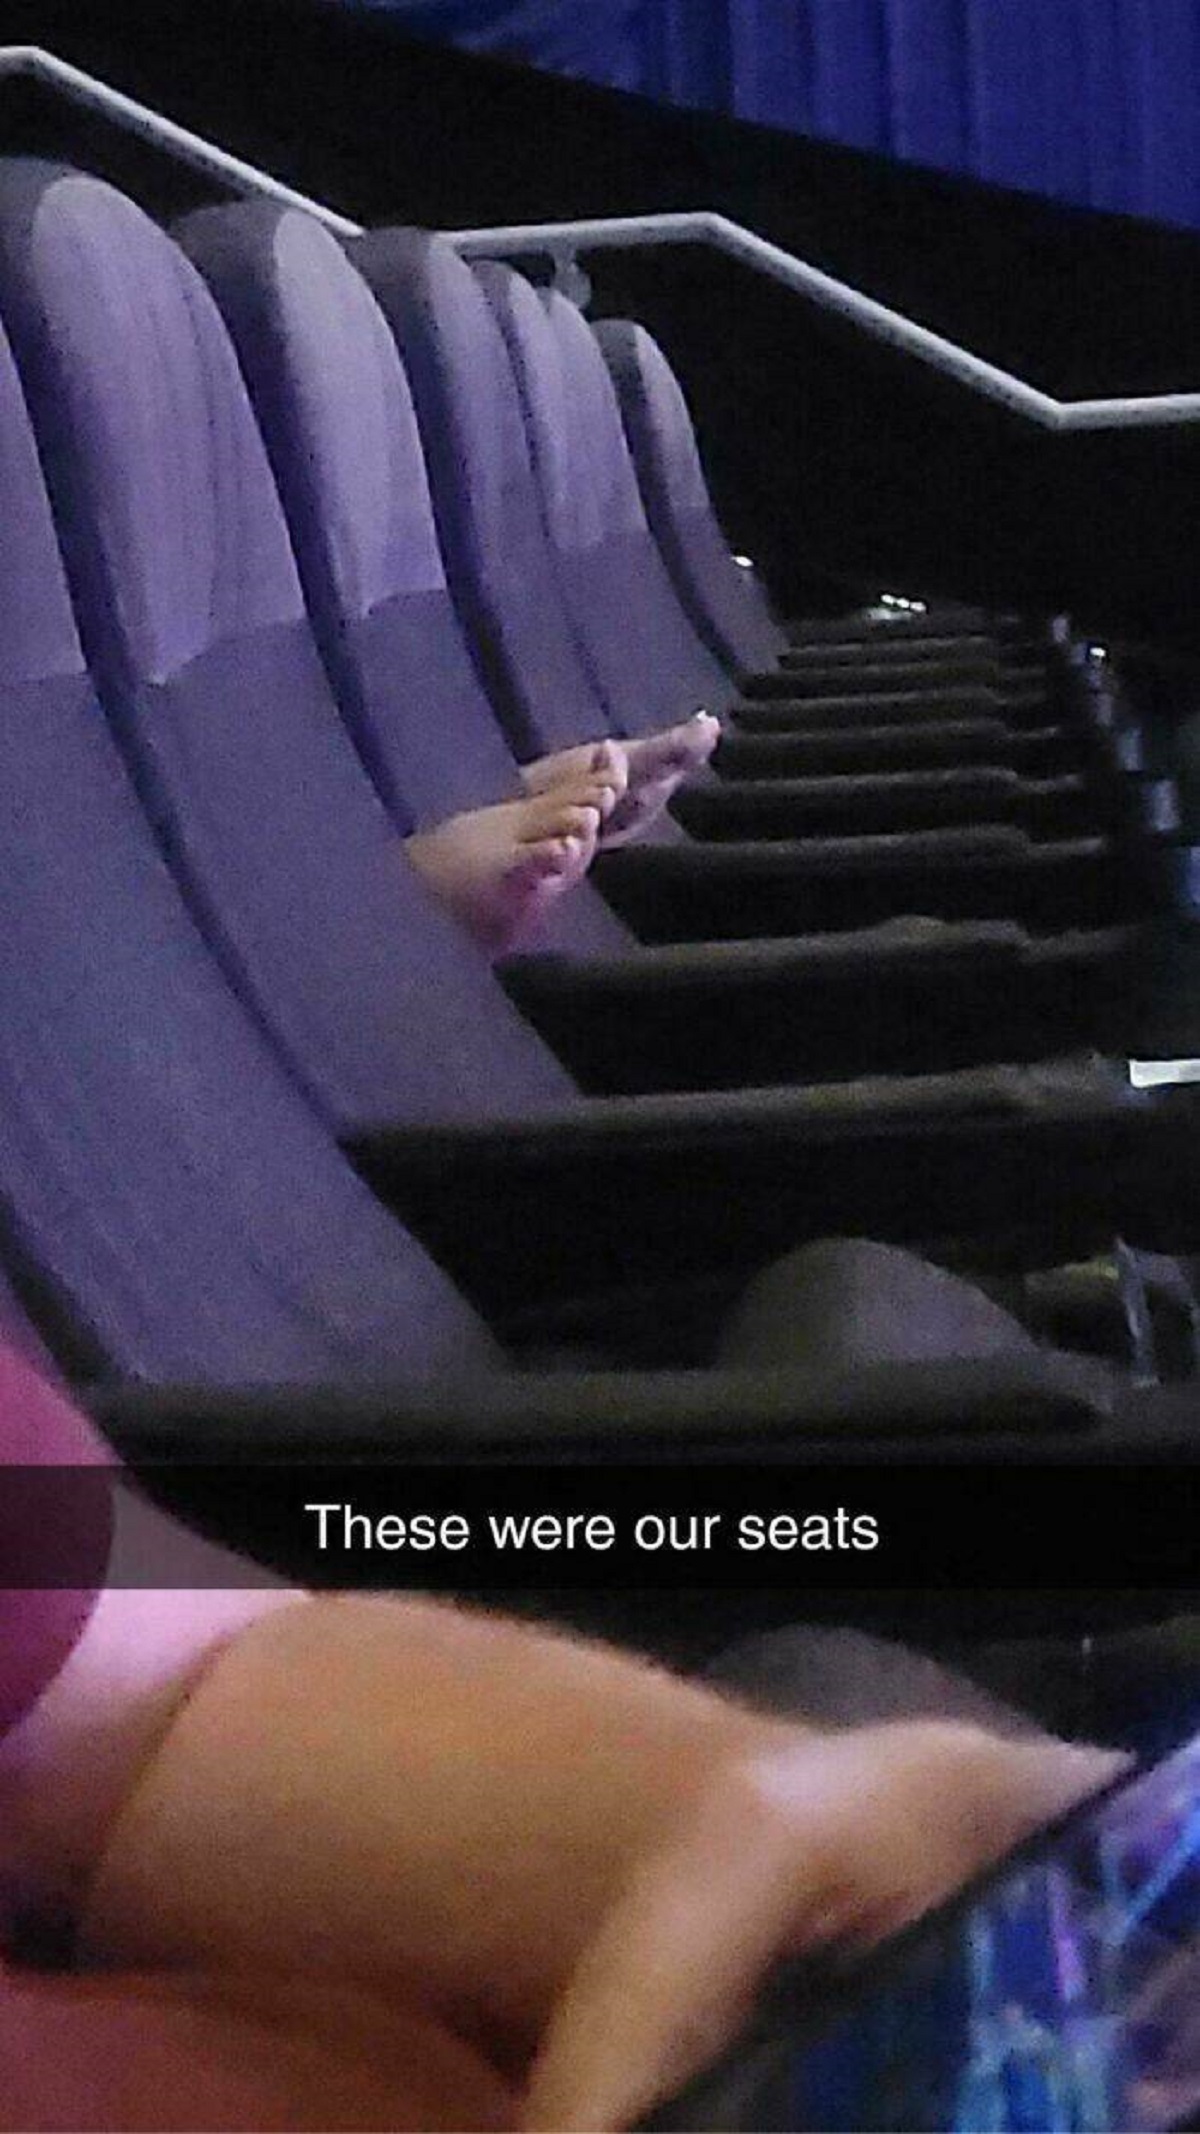 "Had To Sit In Different Seats At The Theater Because This Is What We Found In The Seats We Had Reserved"